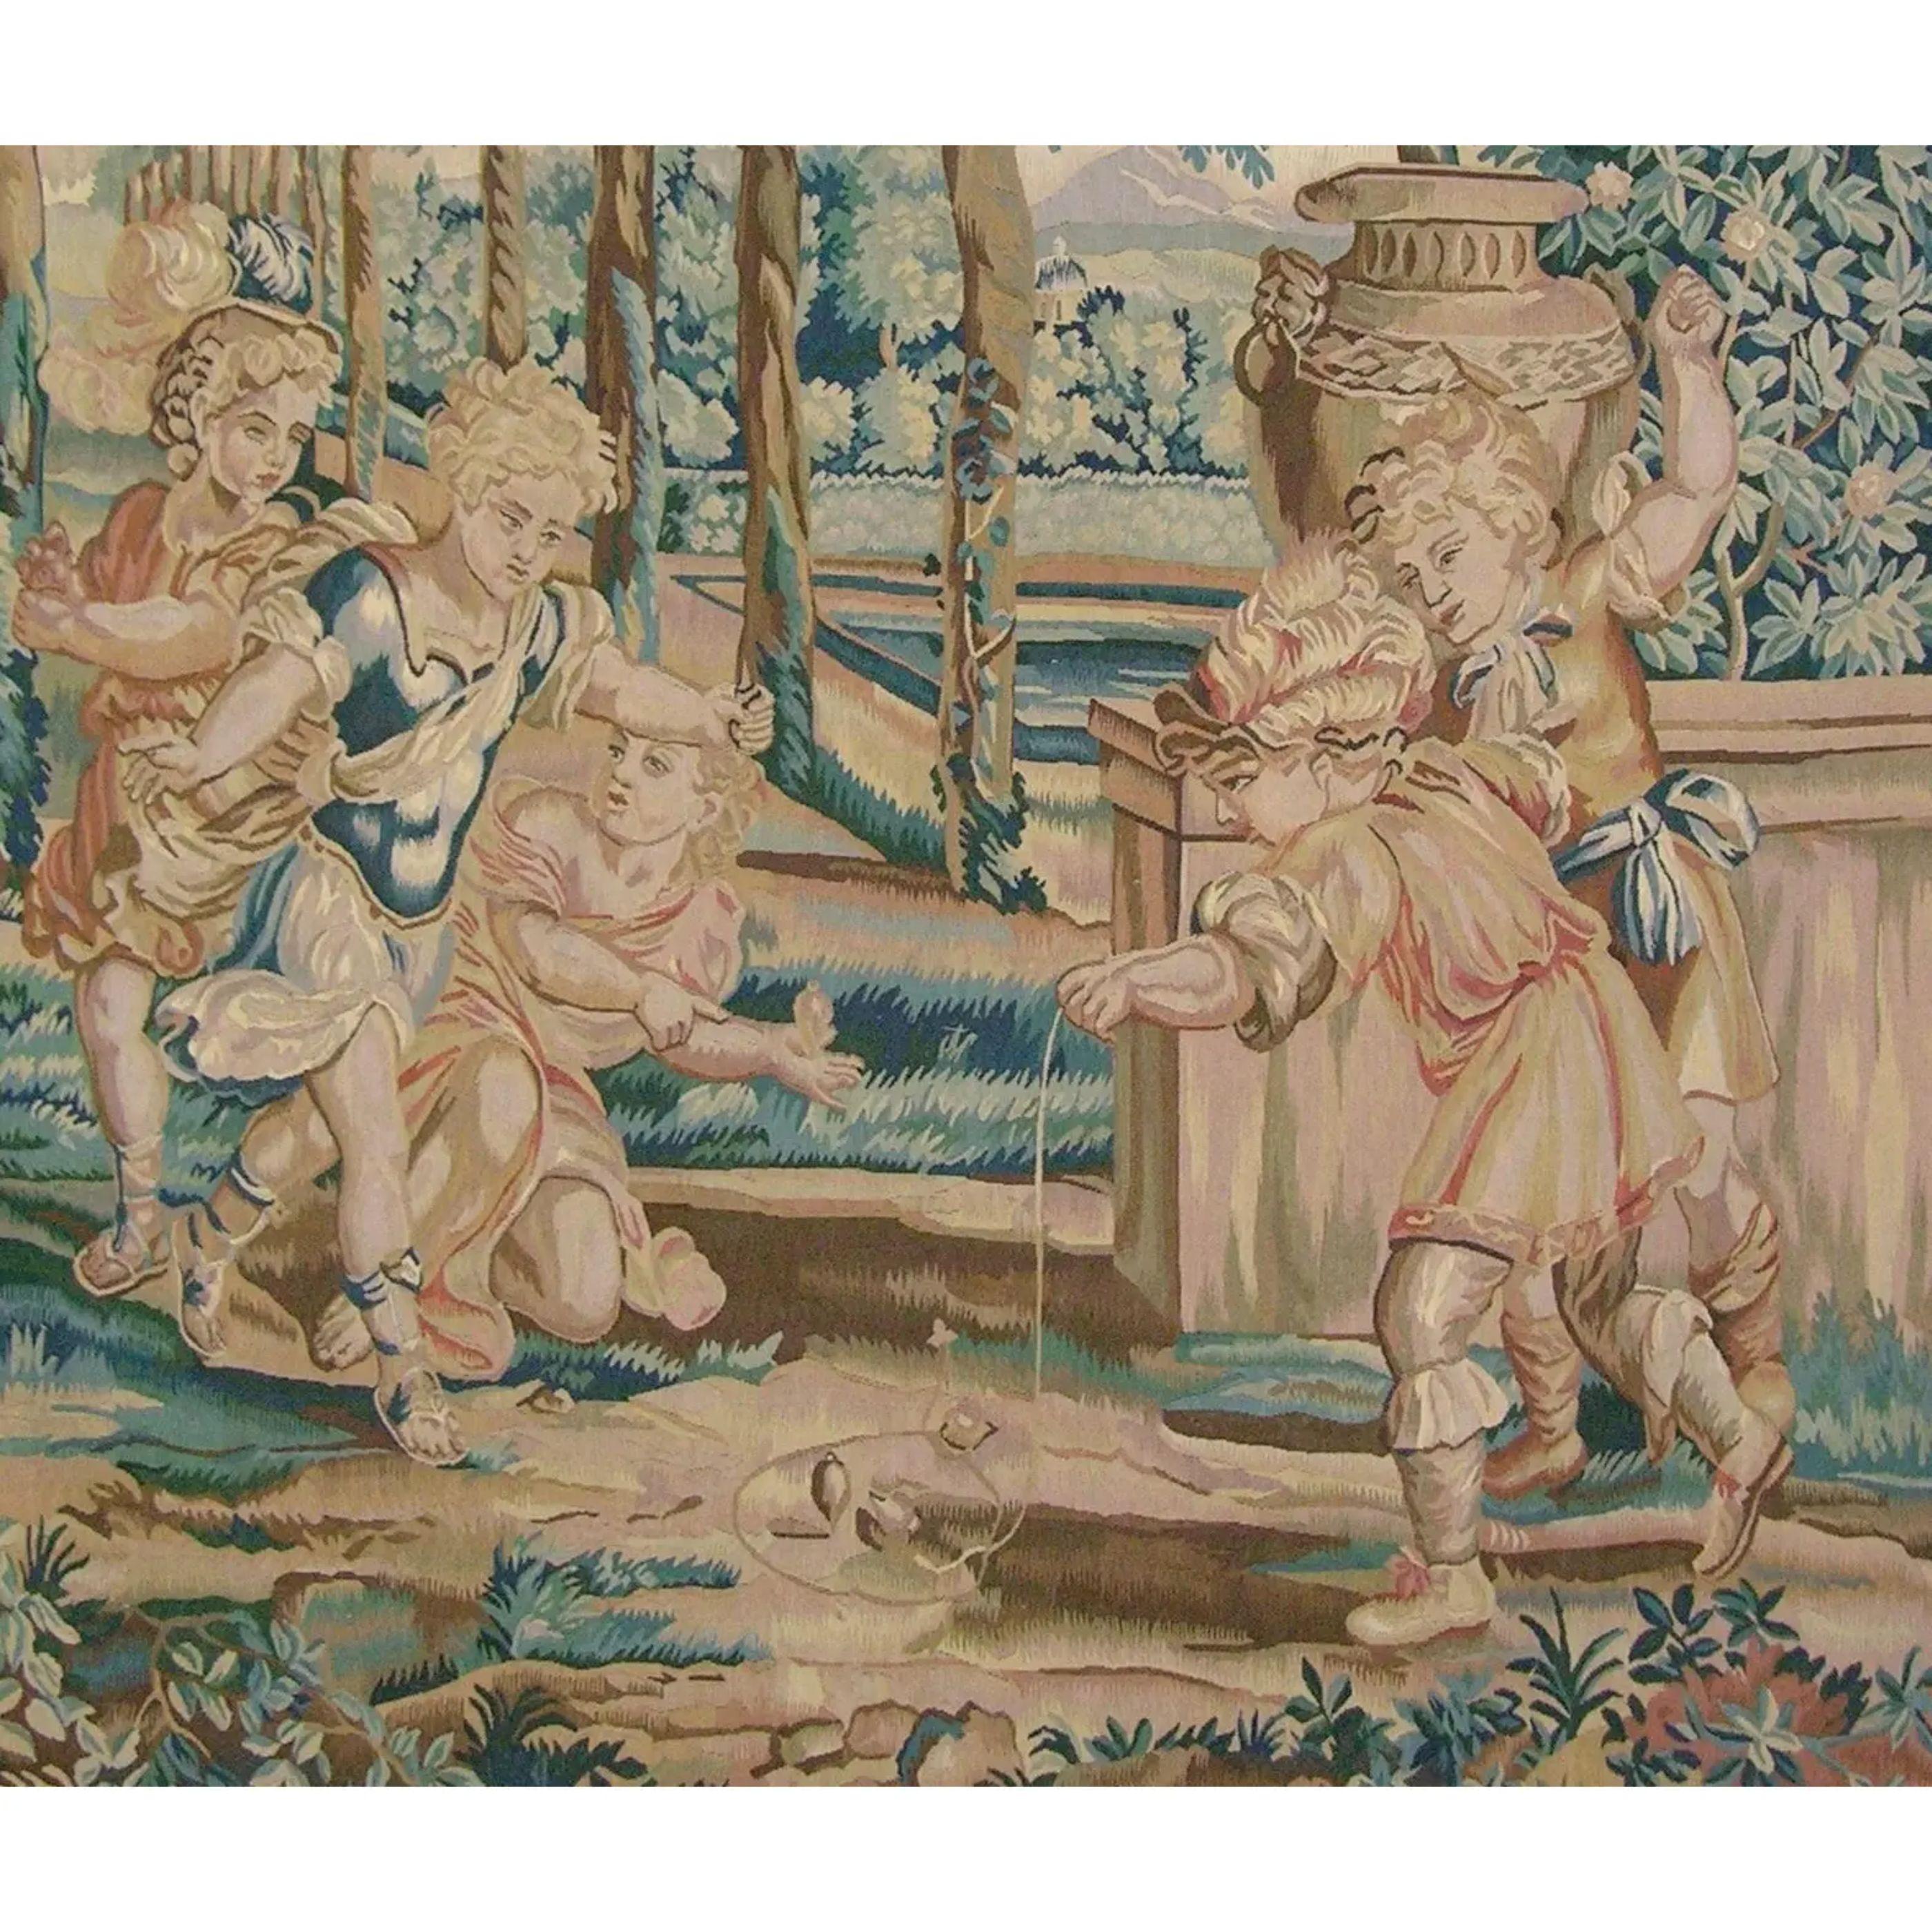 A wall hanging tapestry, simply put, is a textile specifically designed and woven to portray an artistic scene with the intent of hanging it on a wall. Antique tapestries, those that were woven over 100 years ago, are highly sought after collectible